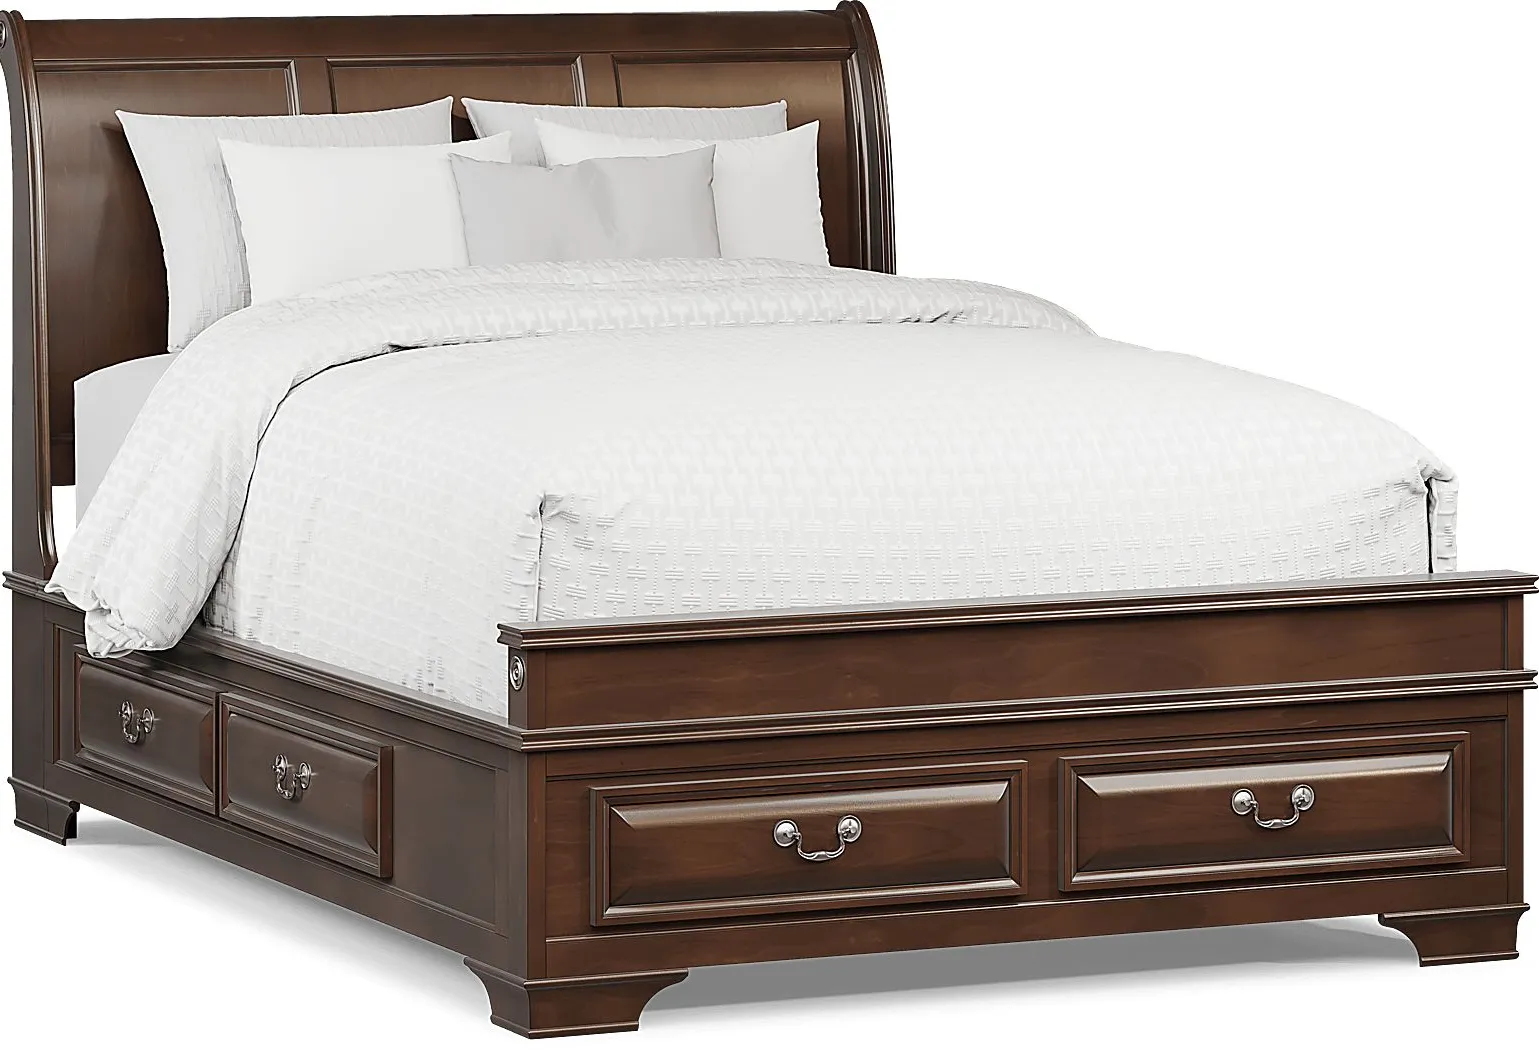 Mill Valley II Cherry 3 Pc Queen Sleigh Bed with Storage